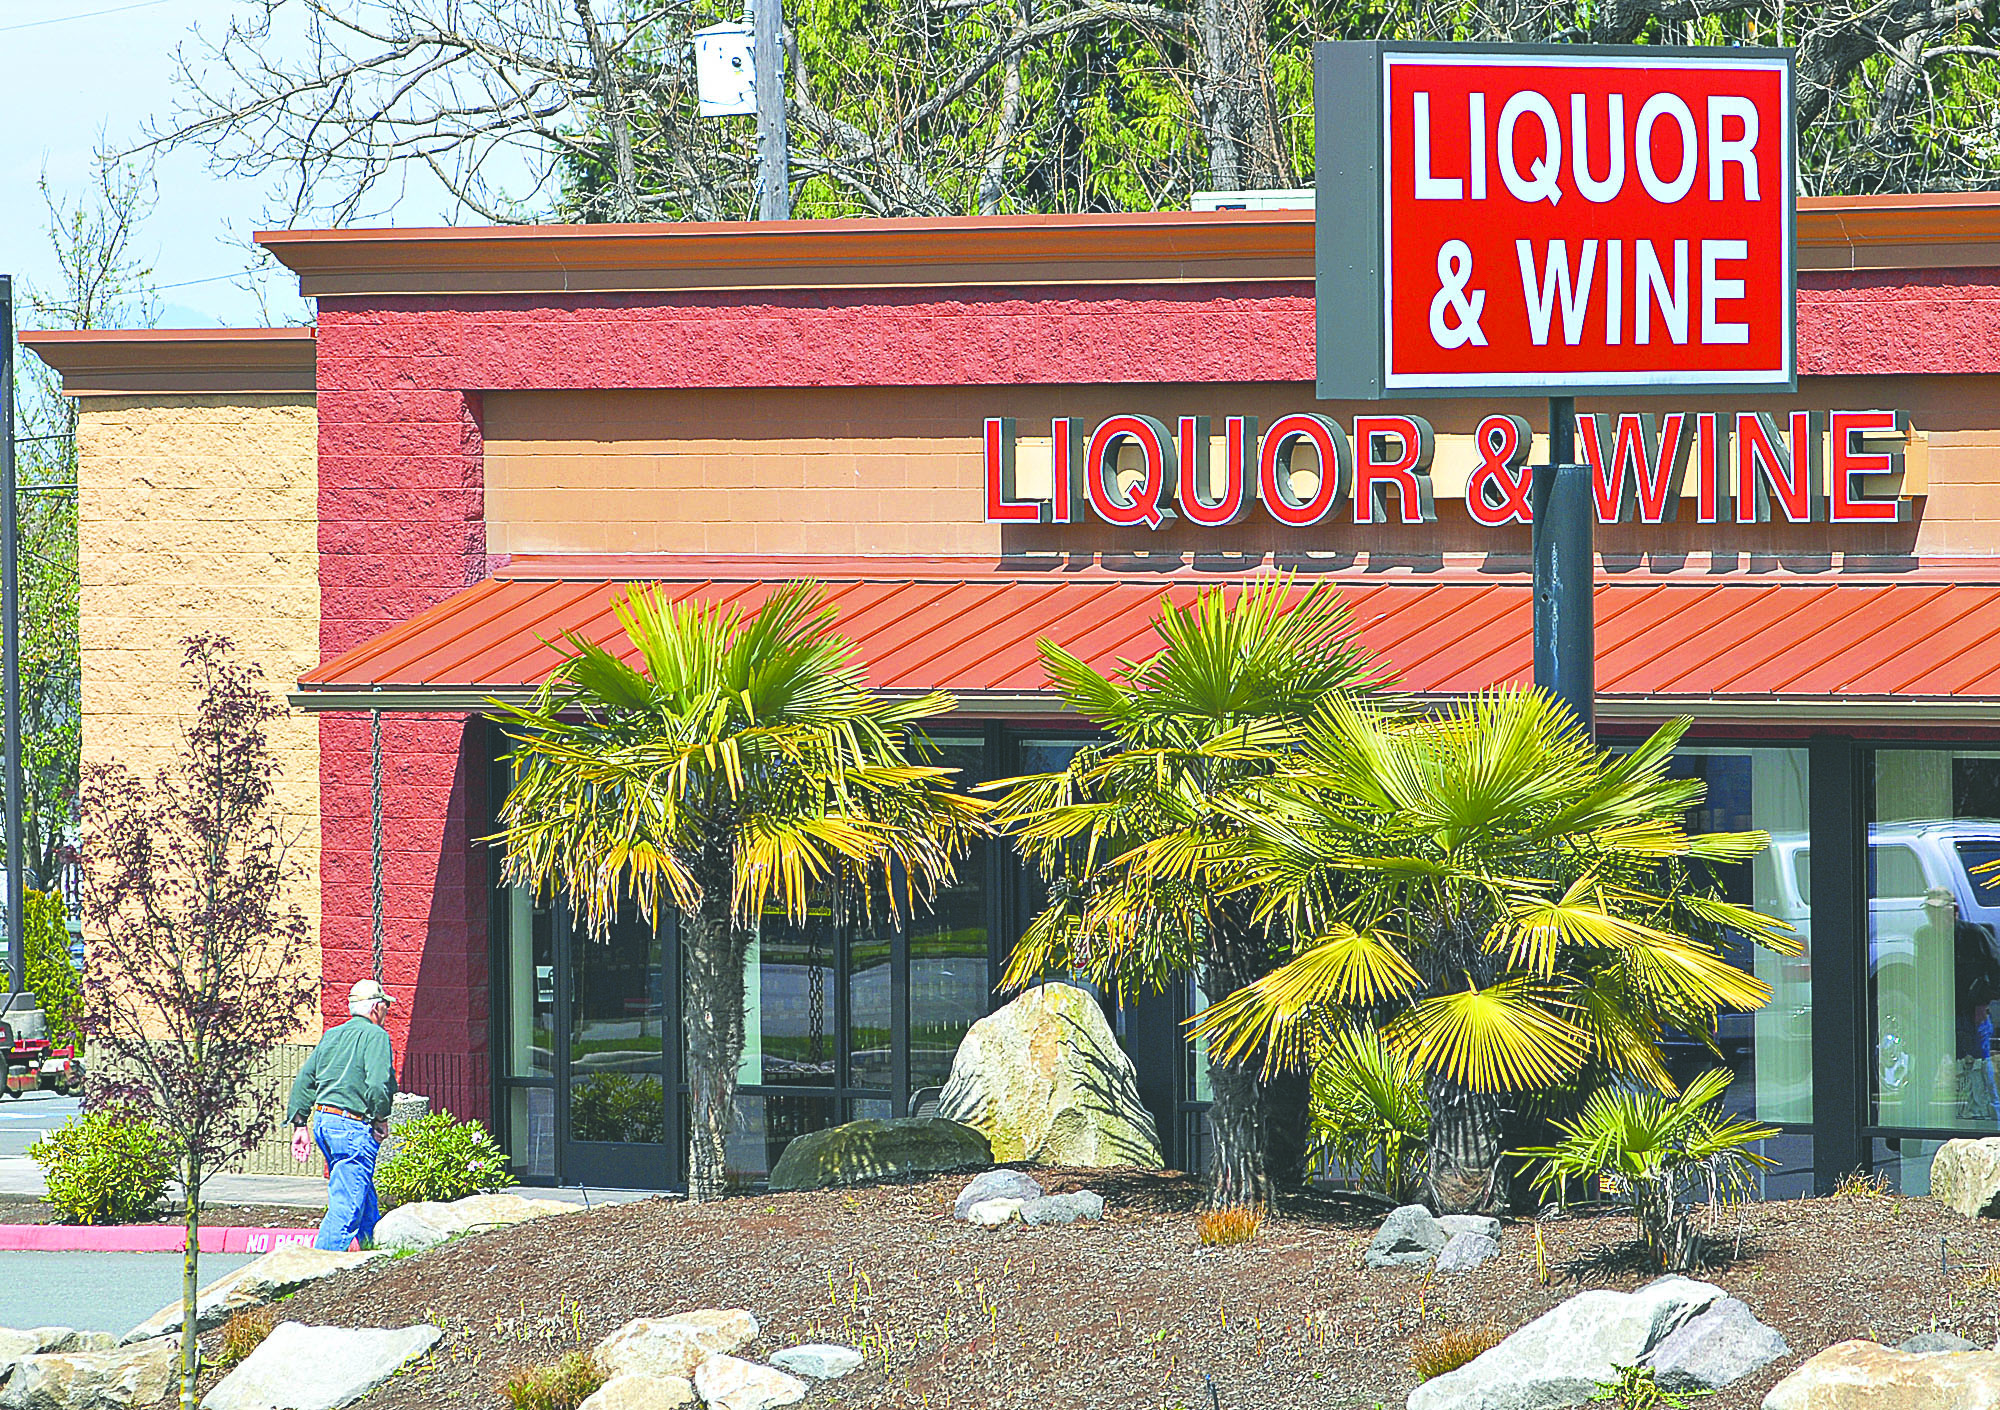 The state liquor store at 1331 E. Front St. in Port Angeles will close temporarily starting Tuesday. Chris Tucker/Peninsula Daily News